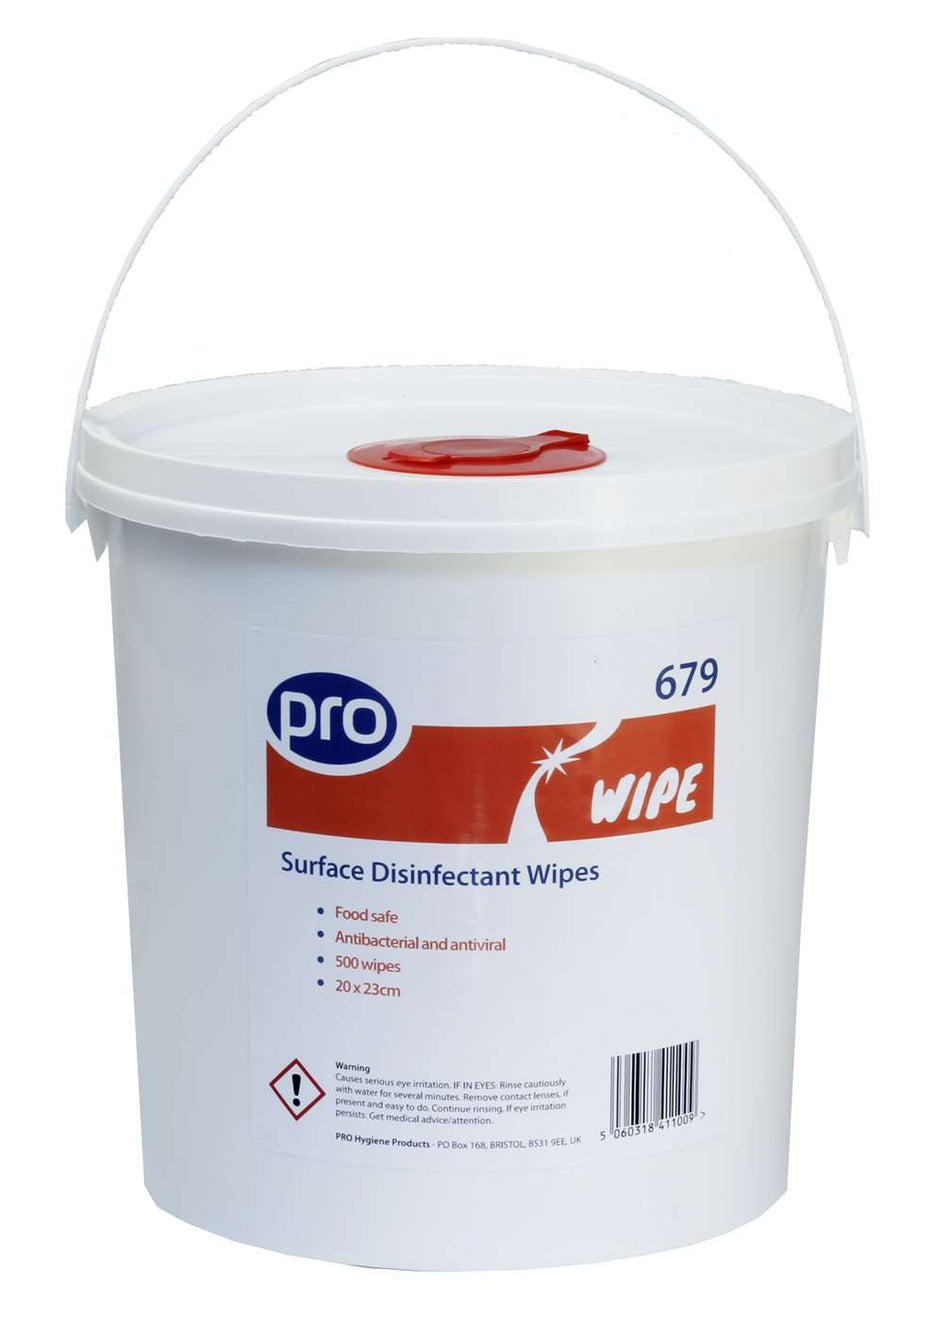 PRO Surface Disinfectant Wipes Box of 500